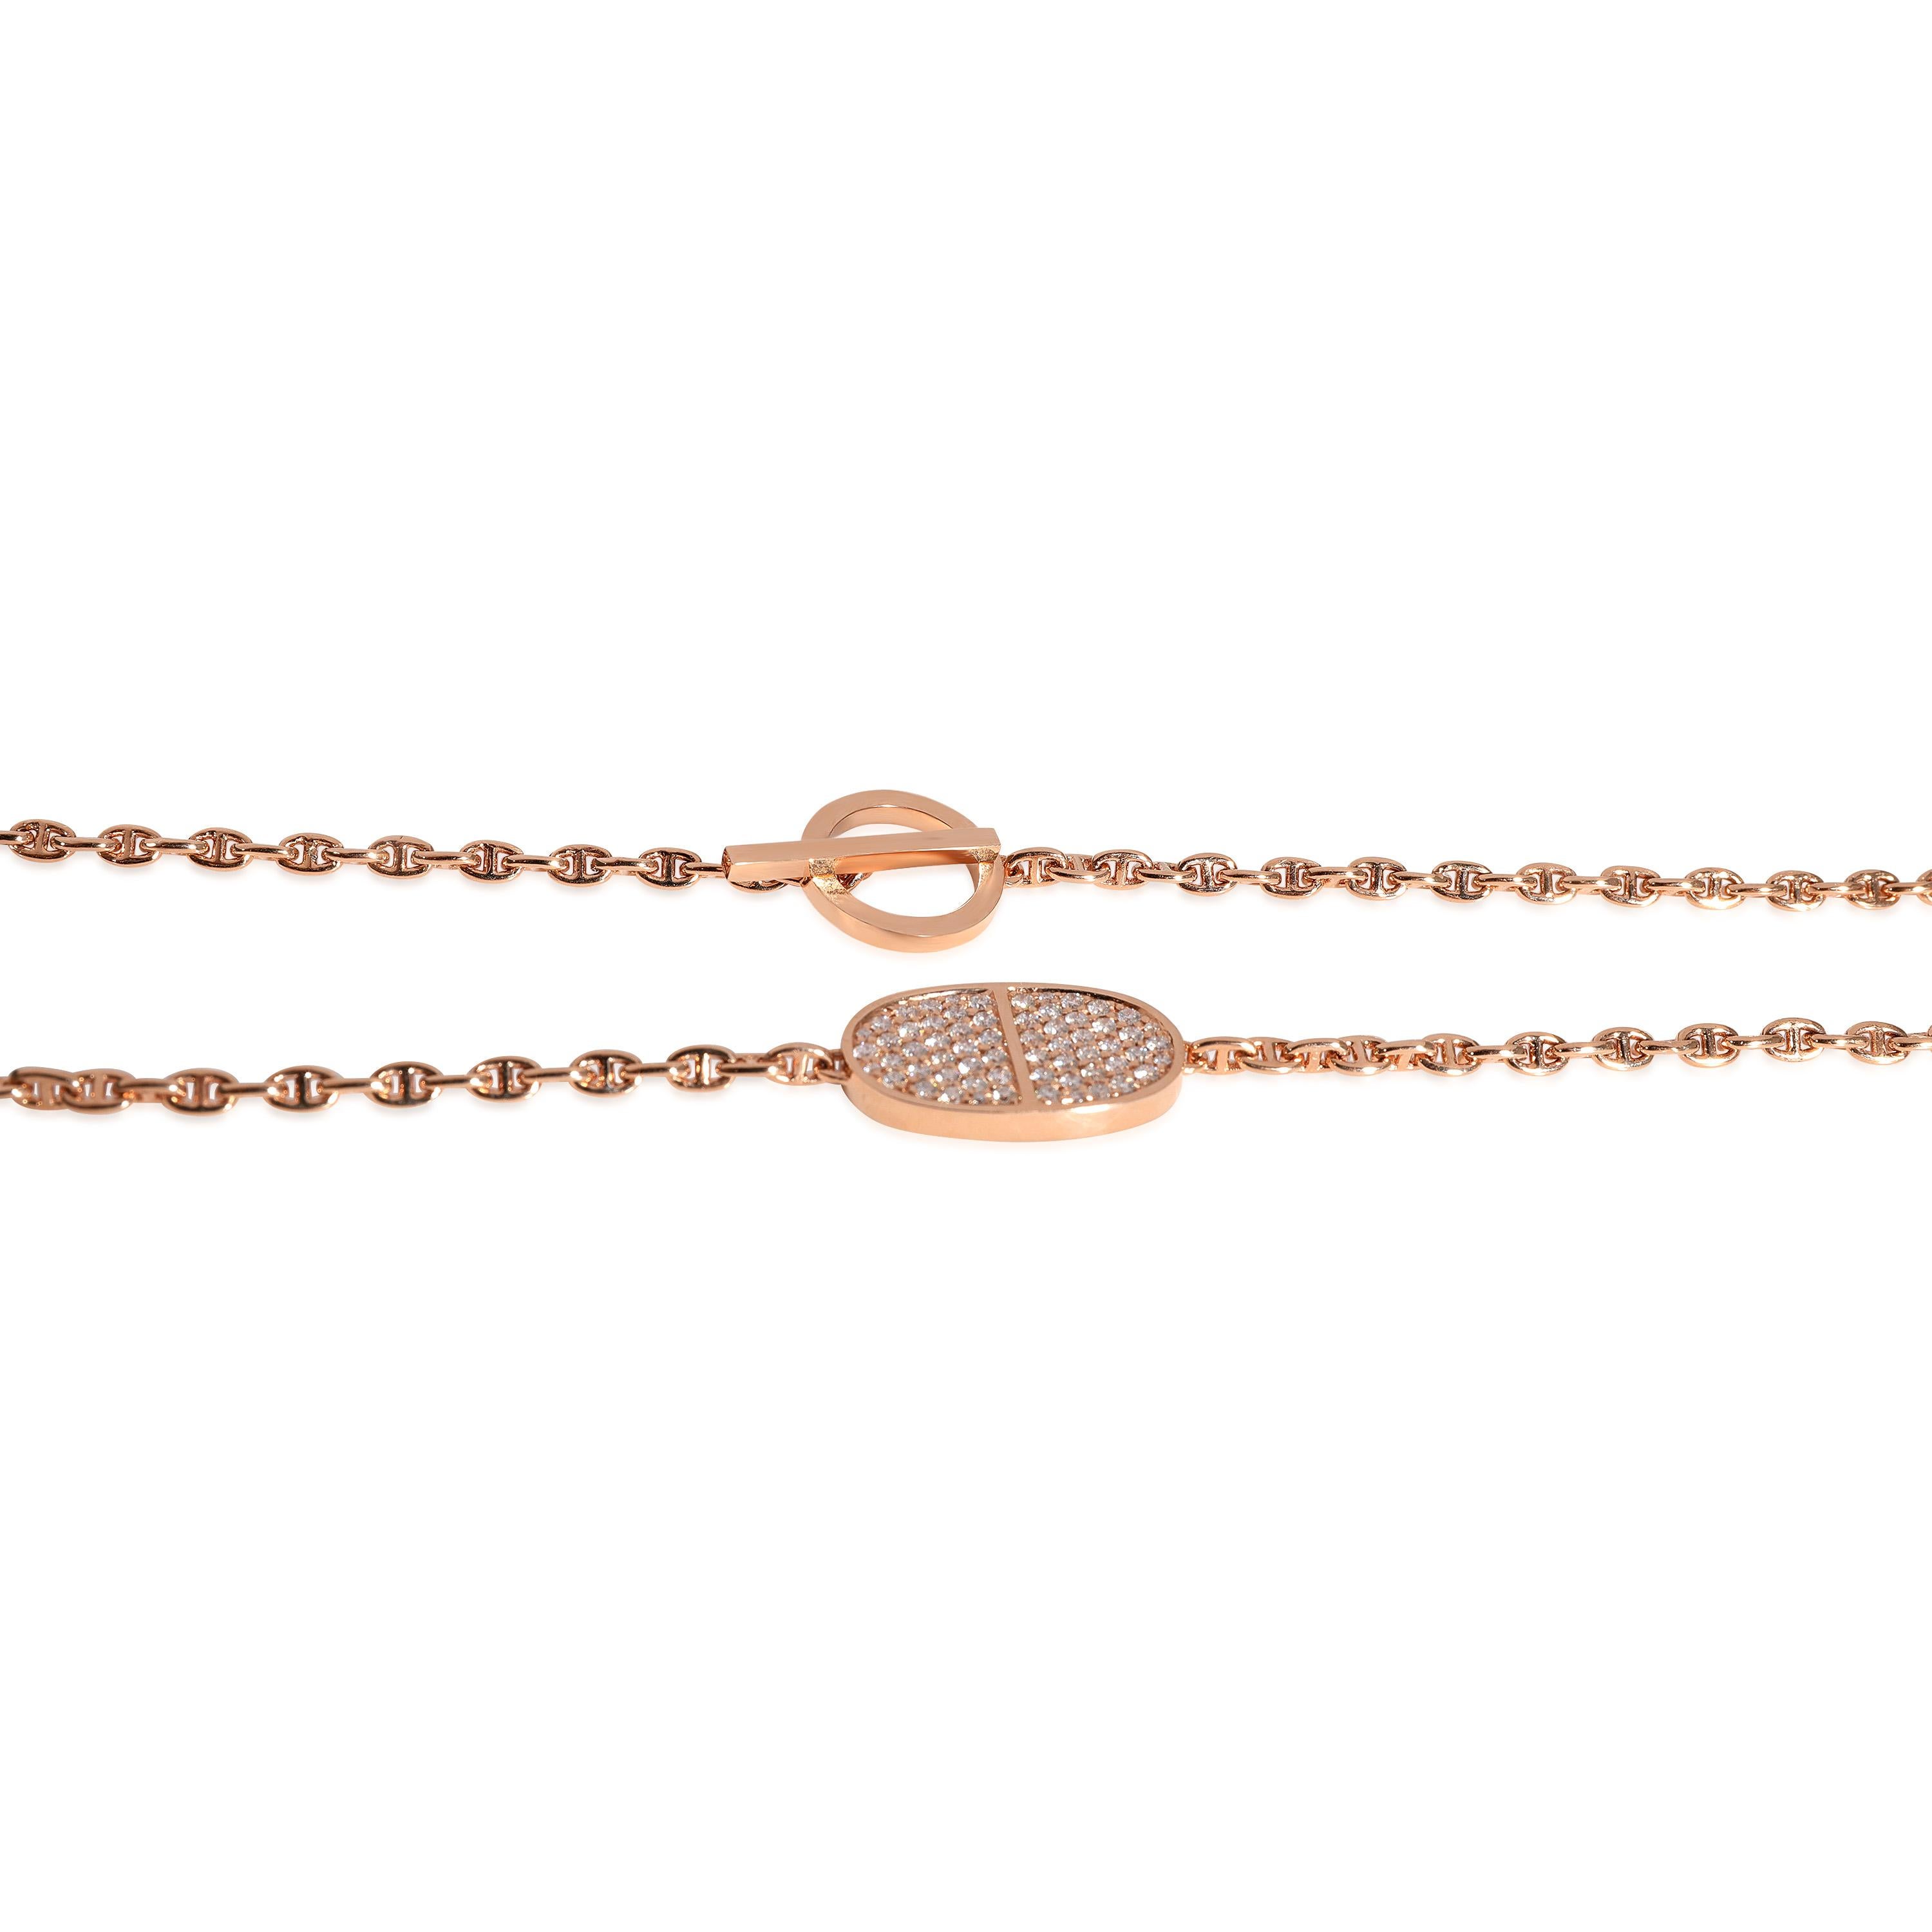 Hermes Chaine d'Ancre Verso Necklace in 18K Rose Gold 0.88 Ctw

PRIMARY DETAILS
SKU: 122681
Listing Title: Hermes Chaine d'Ancre Verso Necklace in 18K Rose Gold 0.88 Ctw
Condition Description: Retails for 13000 USD. In excellent condition. Chain is